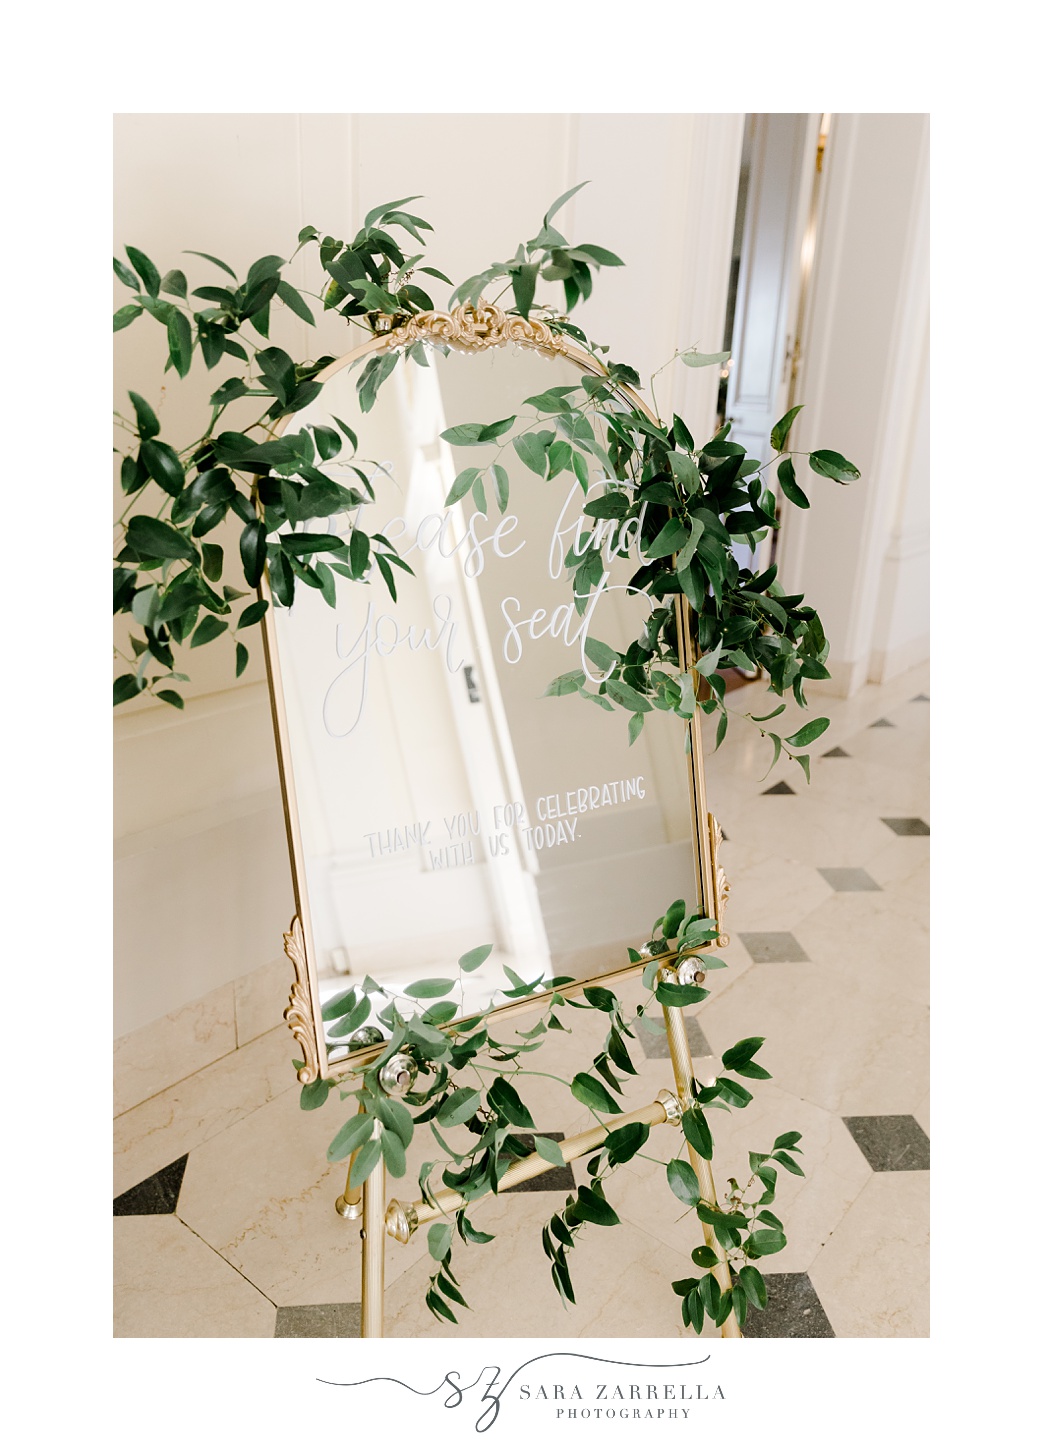 welcome sign on gold framed mirror with greenery around edge 